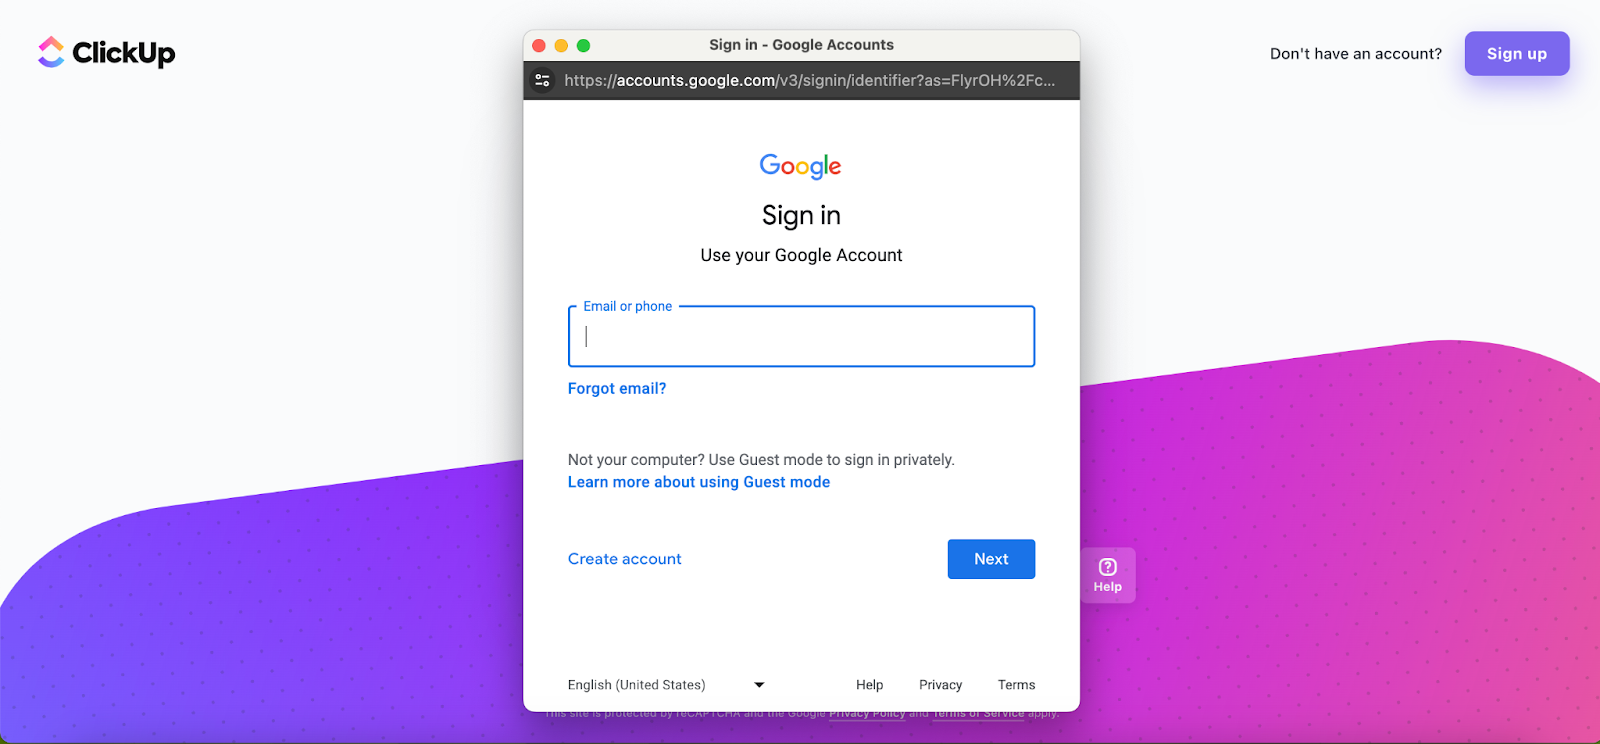 ClickUp login with Google